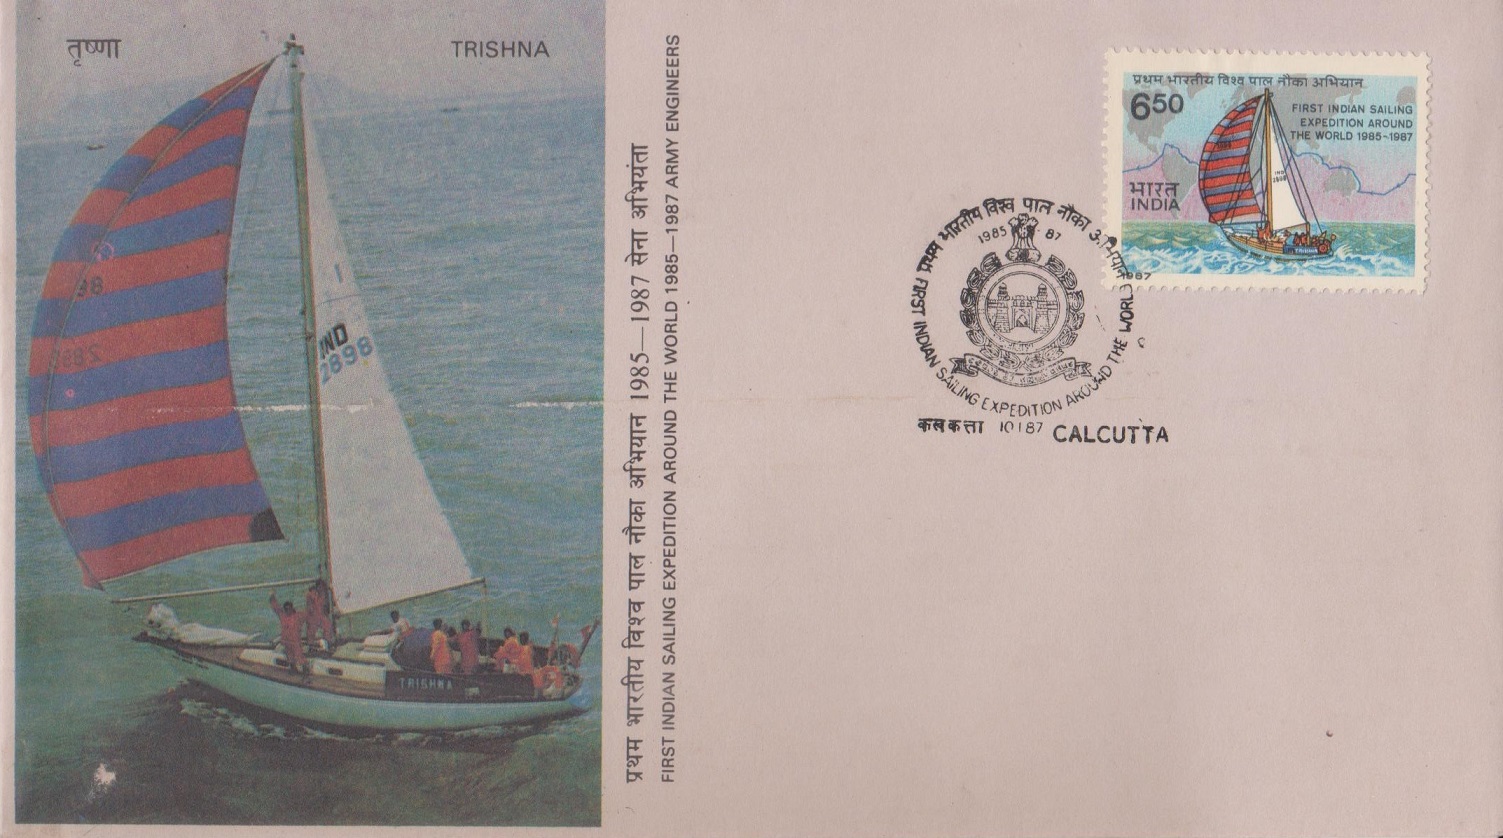 Trishna (yacht) : Corps of Engineers (Indian Army)